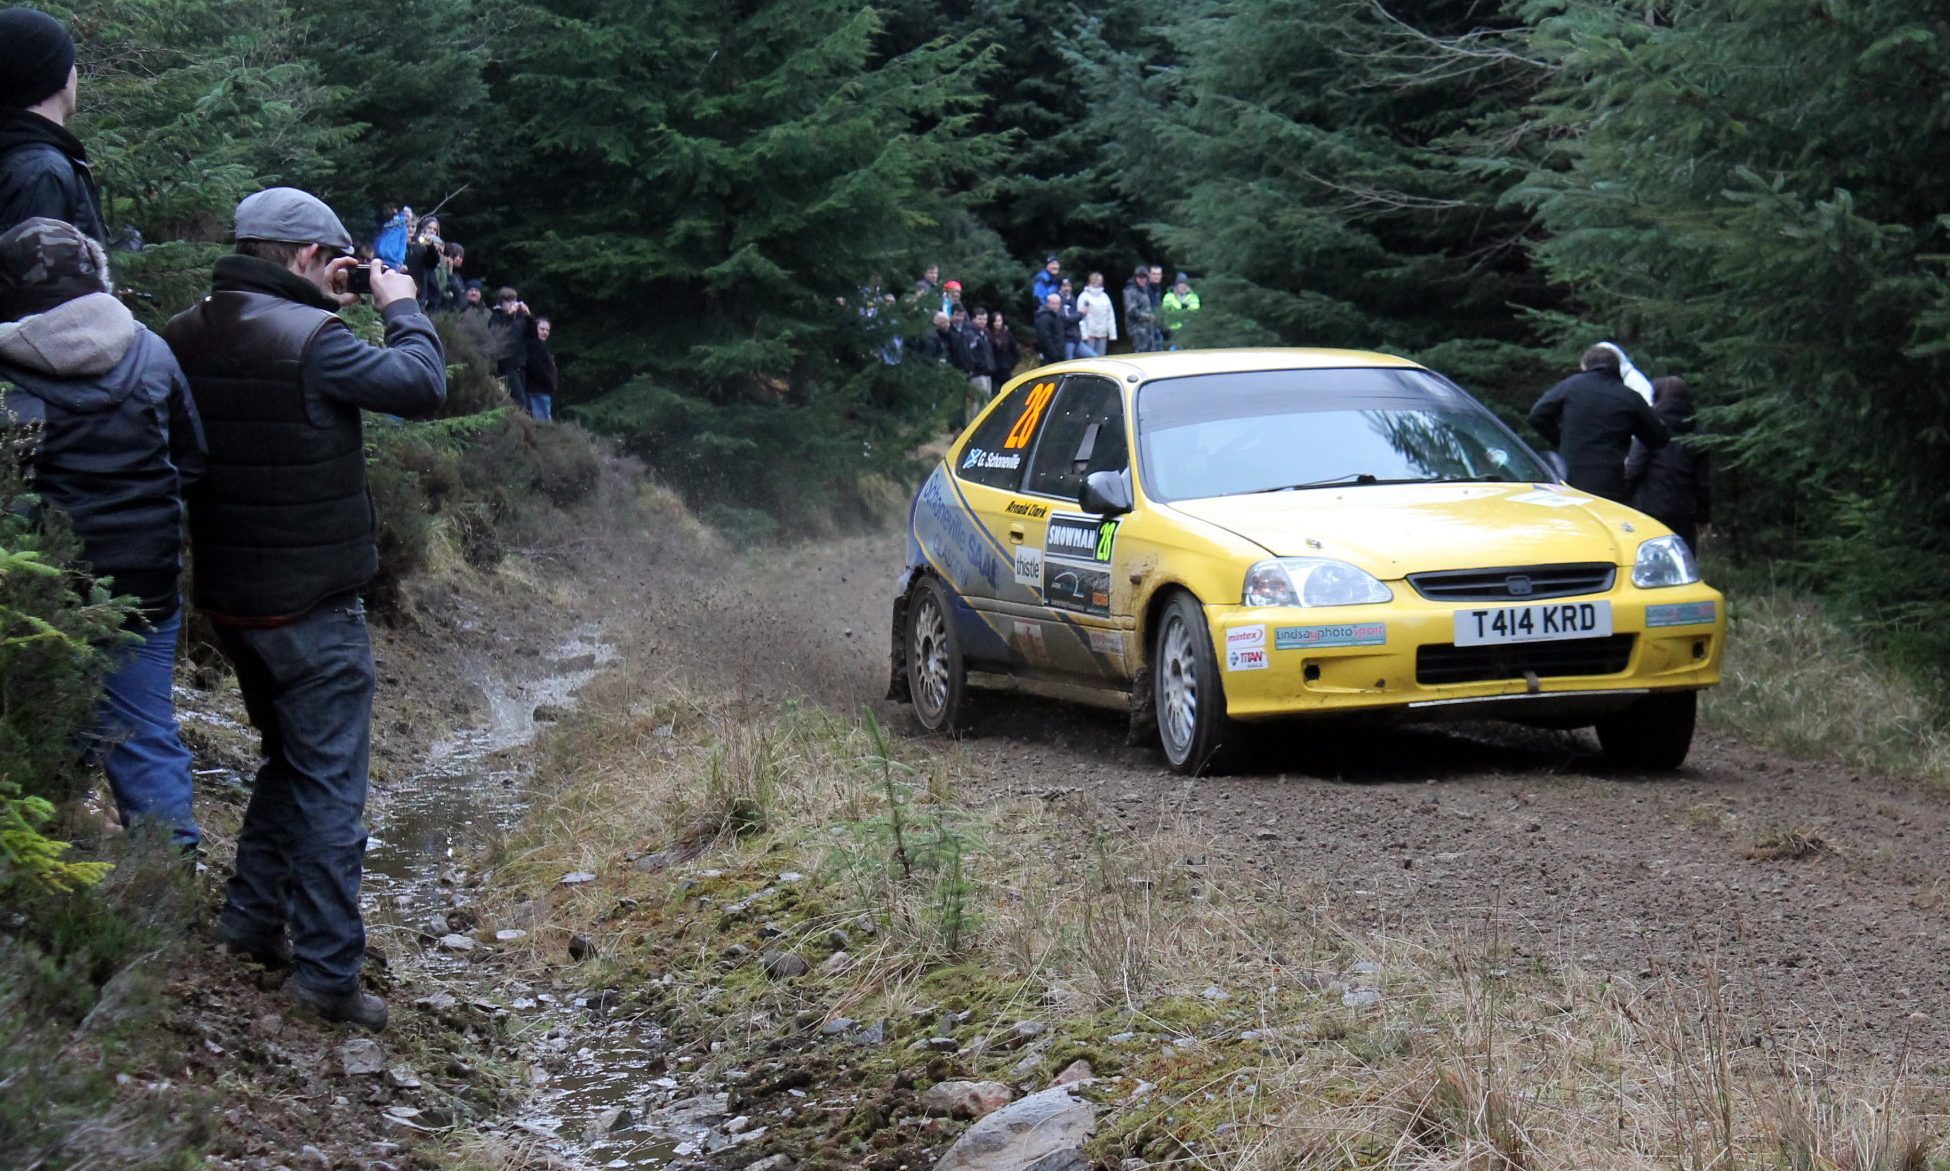 The 2013 Highland Rally: The car in the picture was the vehicle that was involved, less than a minute before it collided before the crowd.